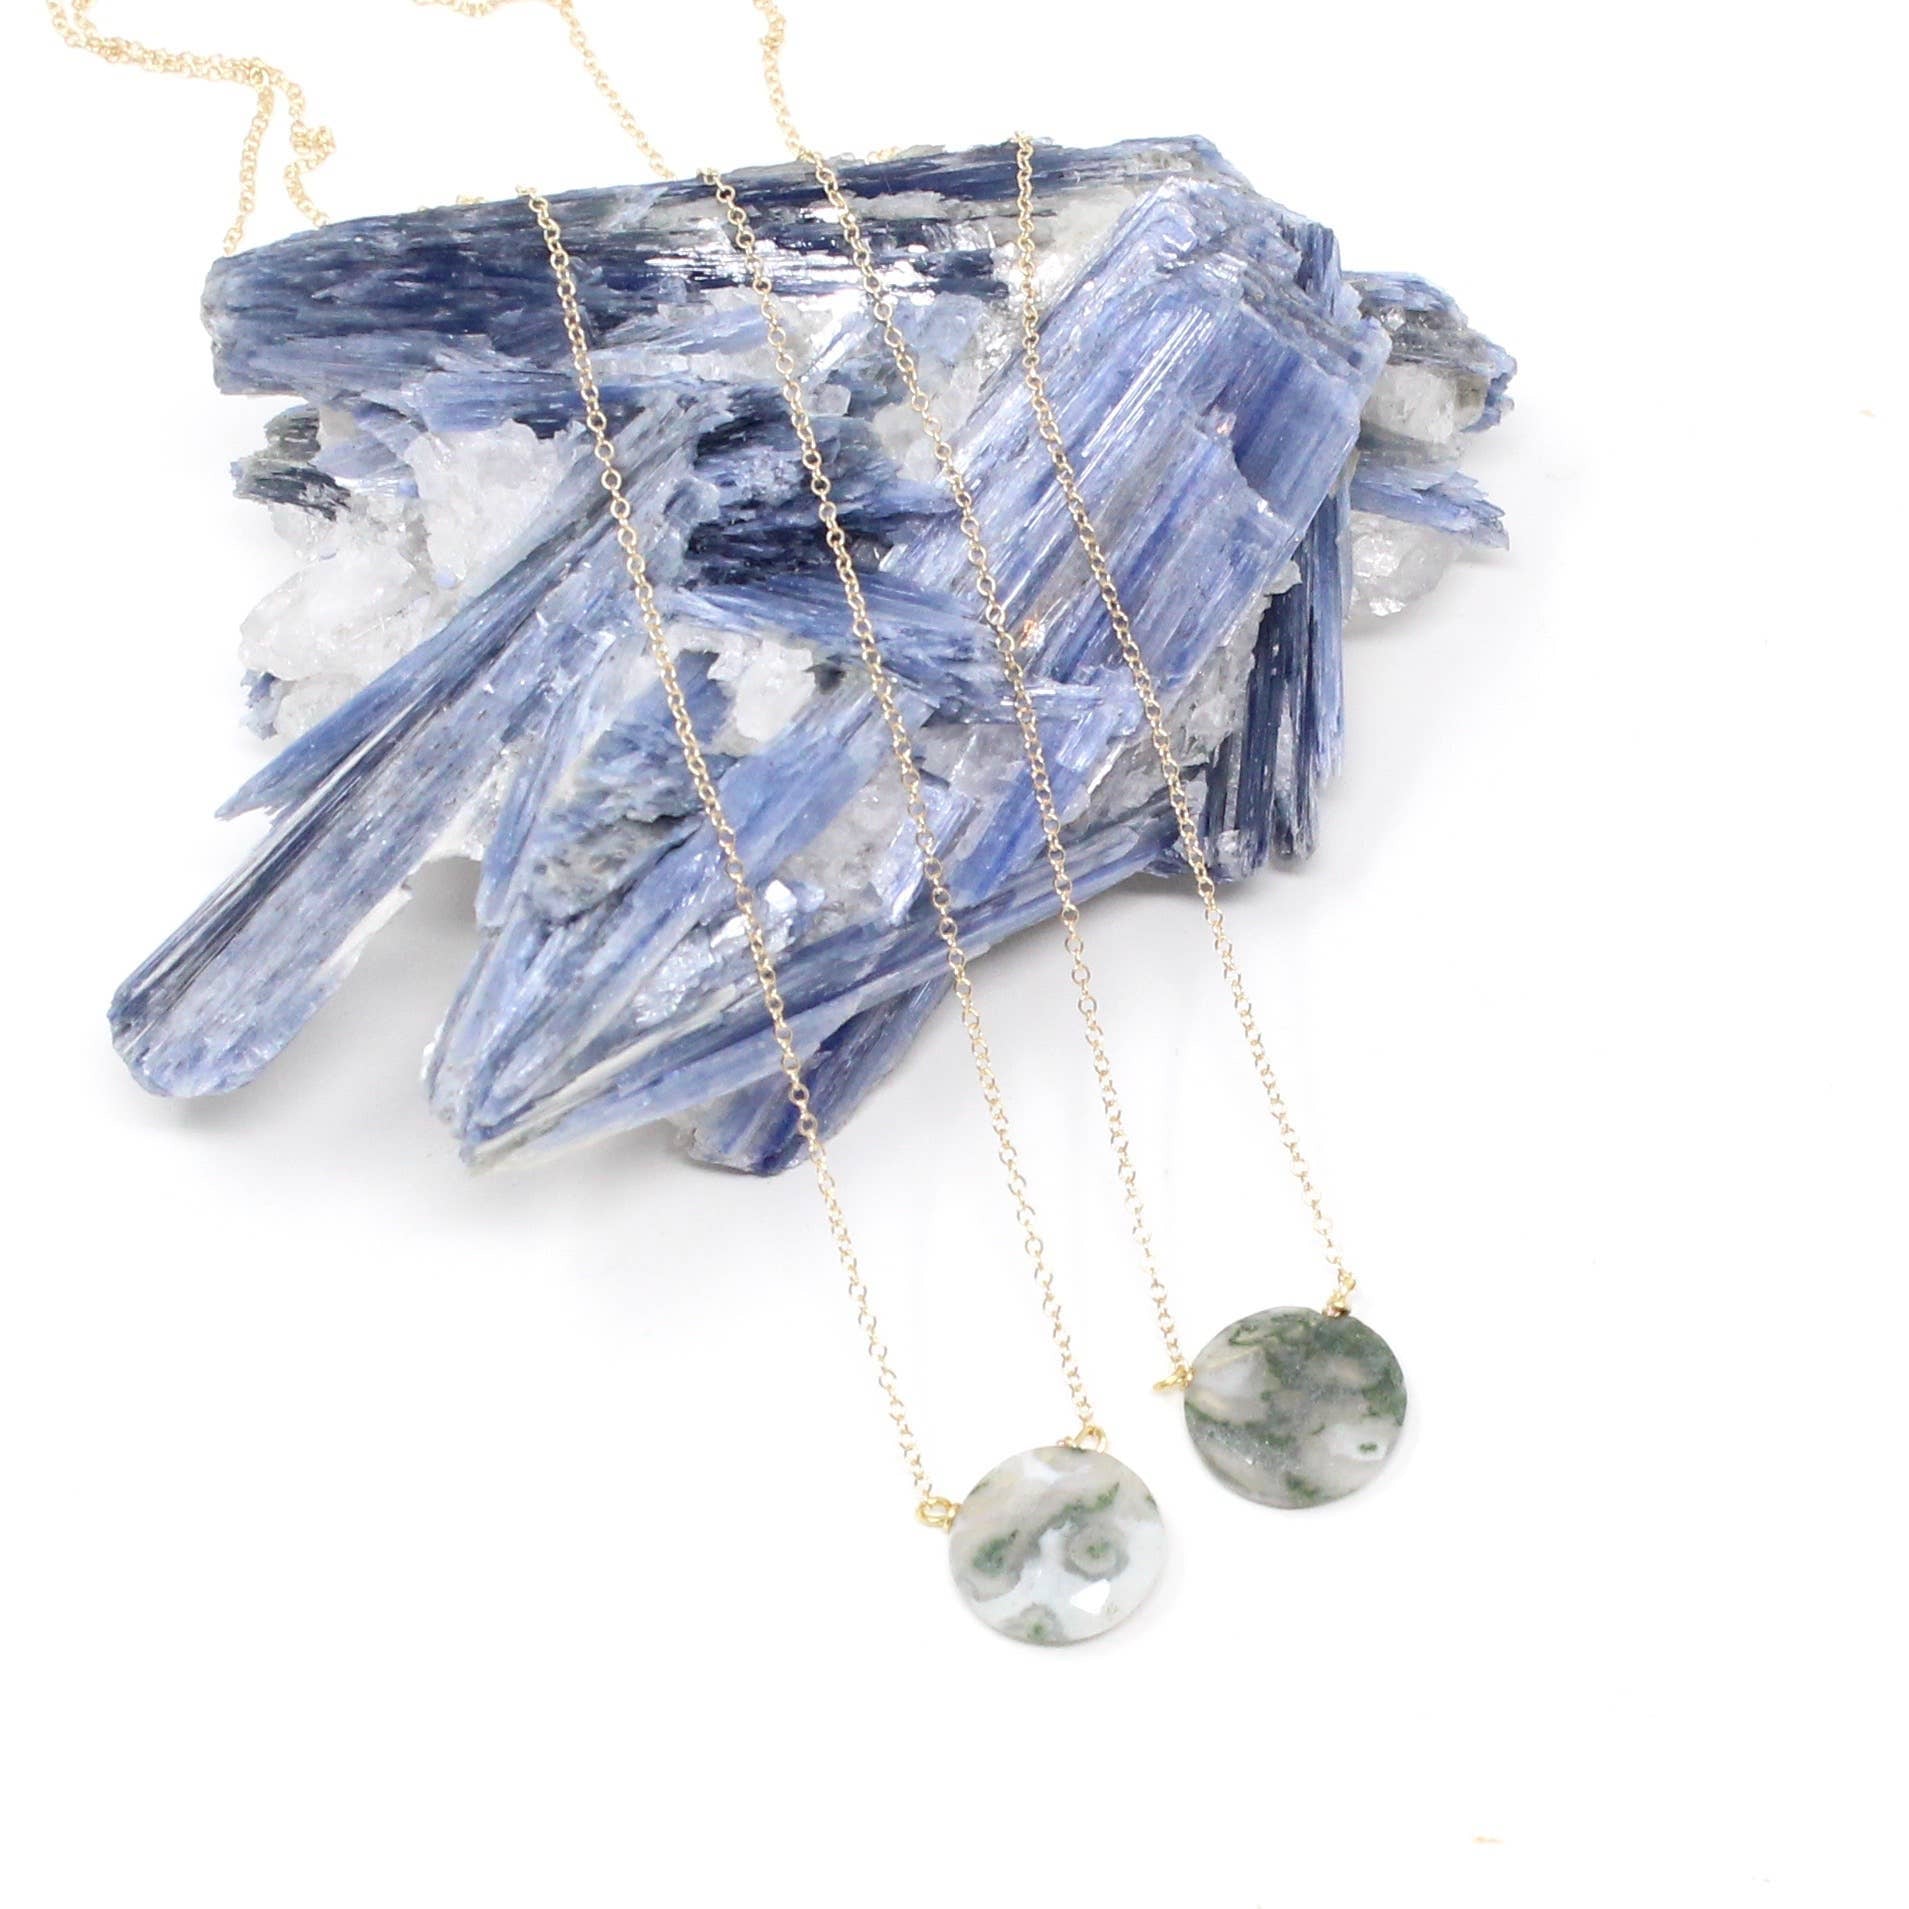 The Moss Agate Necklace